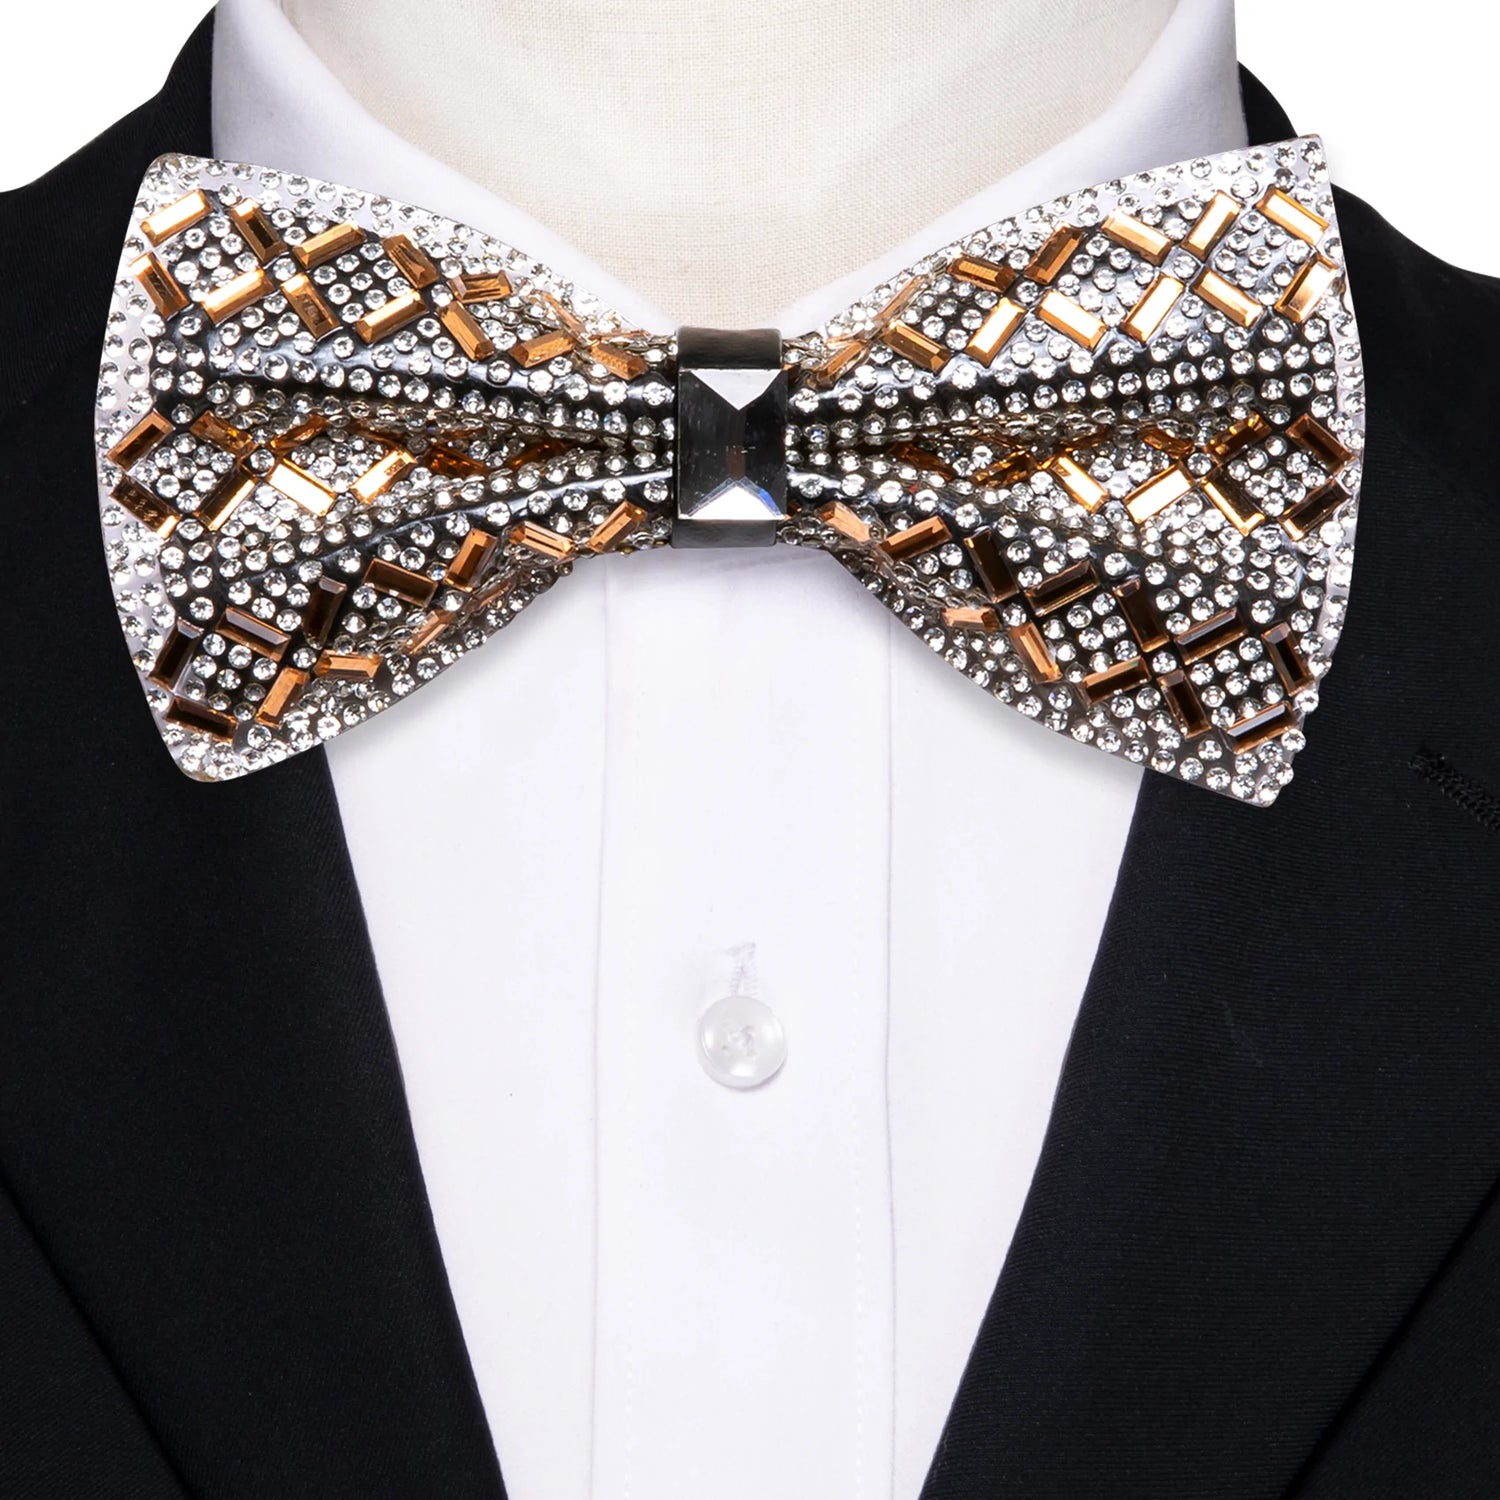 BOW TIE SETS